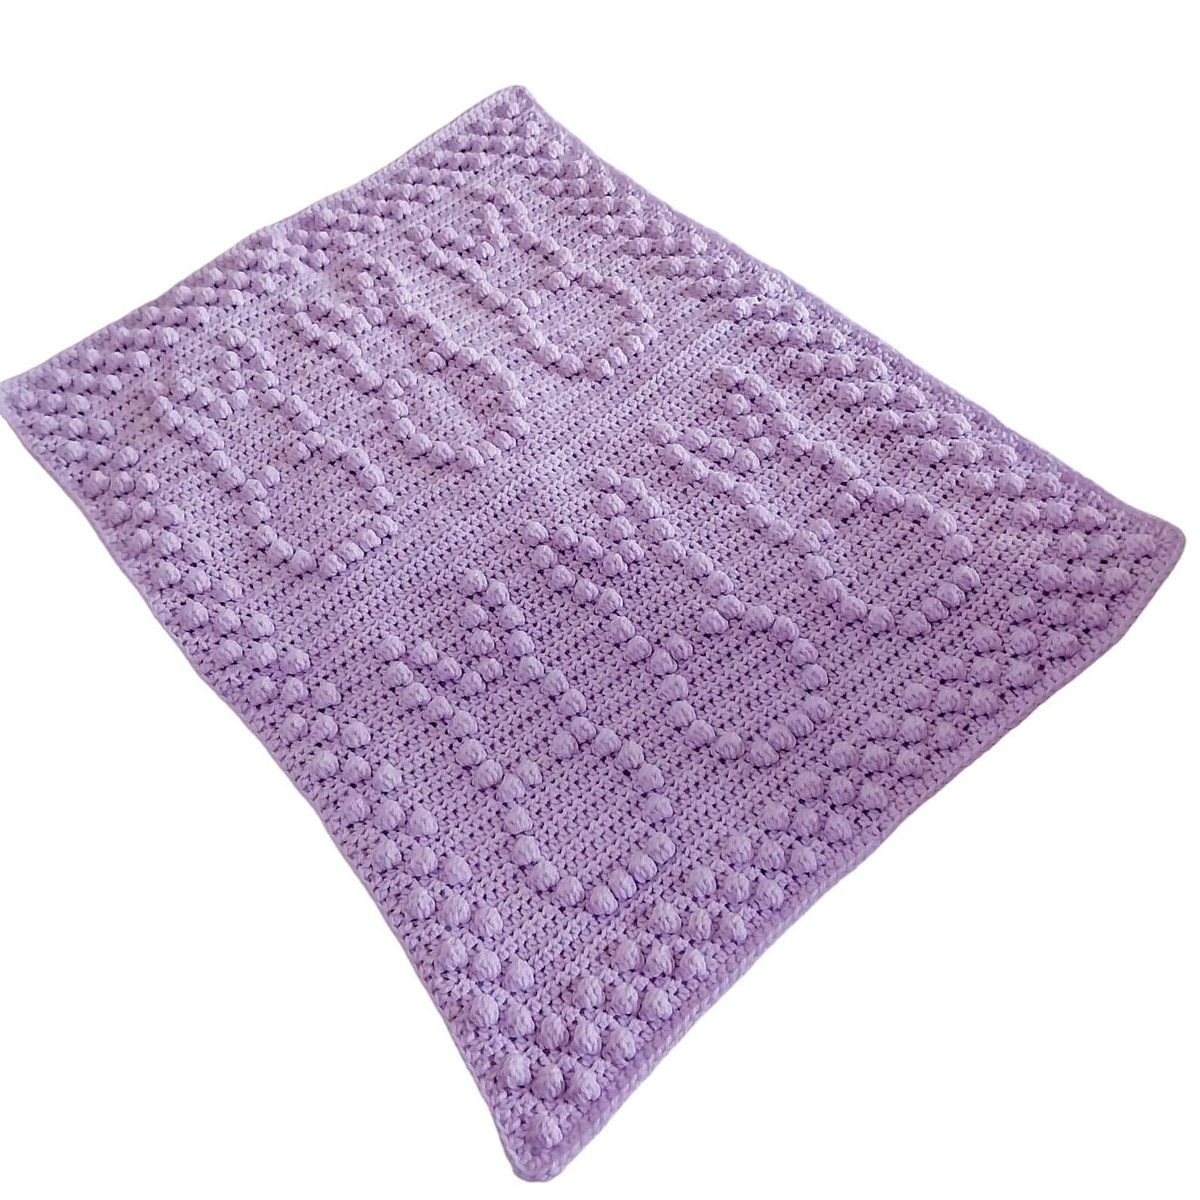 Looking for the perfect baby shower gift? This lilac crochet baby blanket featuring a cute puff bobbly bunny pattern is just the thing! Handcrafted with love, available on #Etsy. #handmade #babygifts knittingtopia.etsy.com/listing/140308… #knittingtopia #MHHSBD #craftbizparty #babyshowergifts